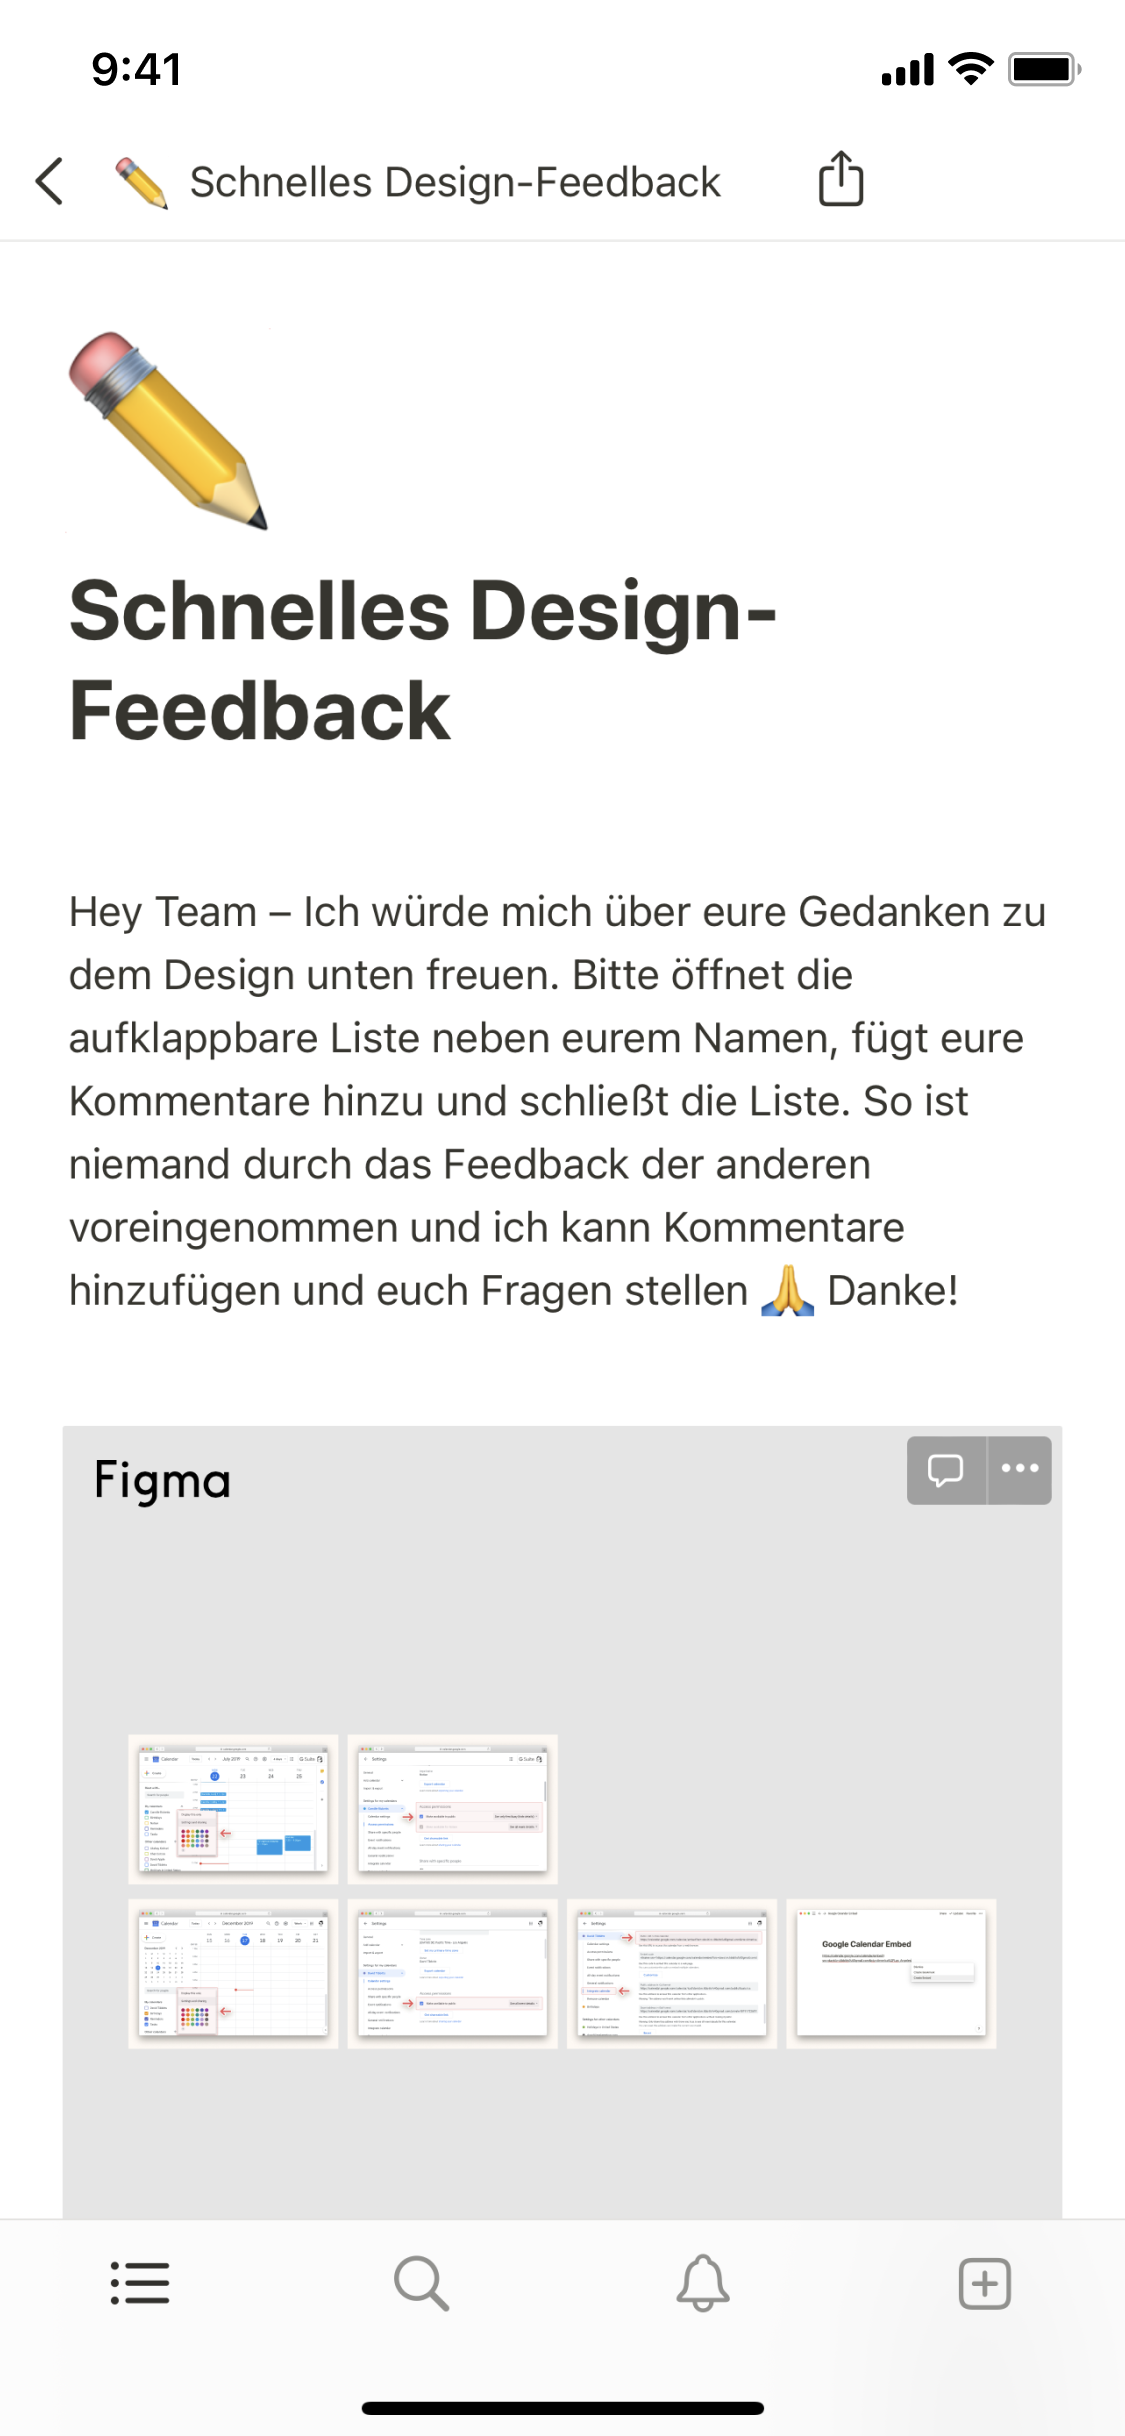 The mobile image for the Quick design feedback template